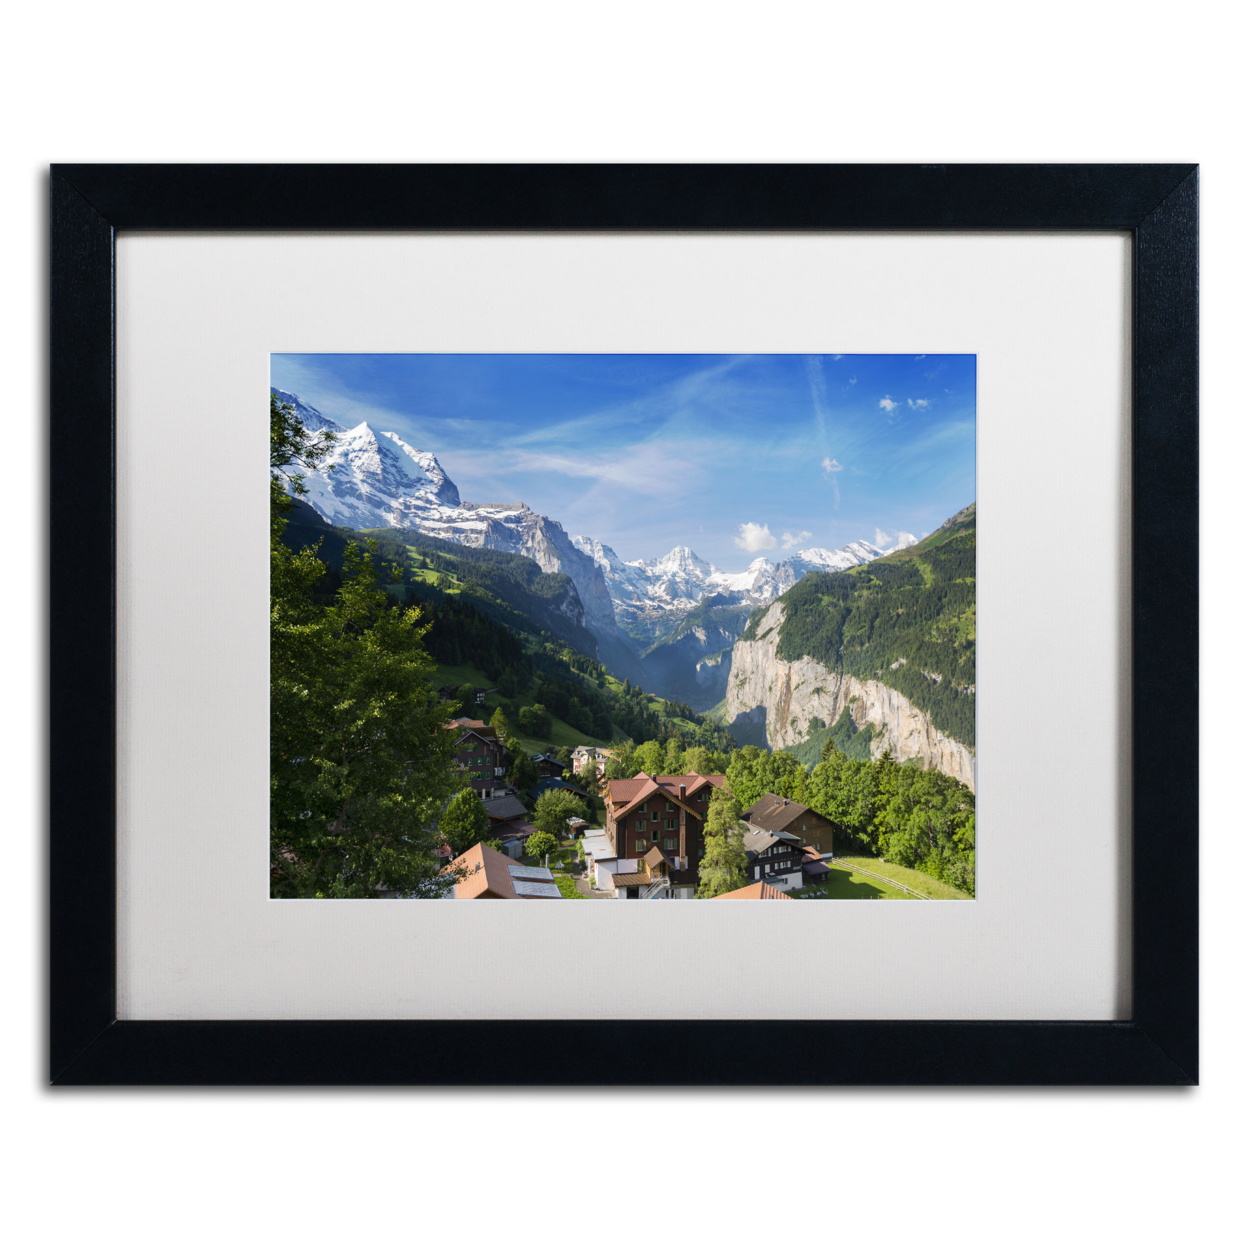 Philippe Sainte-Laudy 'A New Day In The Swiss Alps' Black Wooden Framed Art 18 X 22 Inches